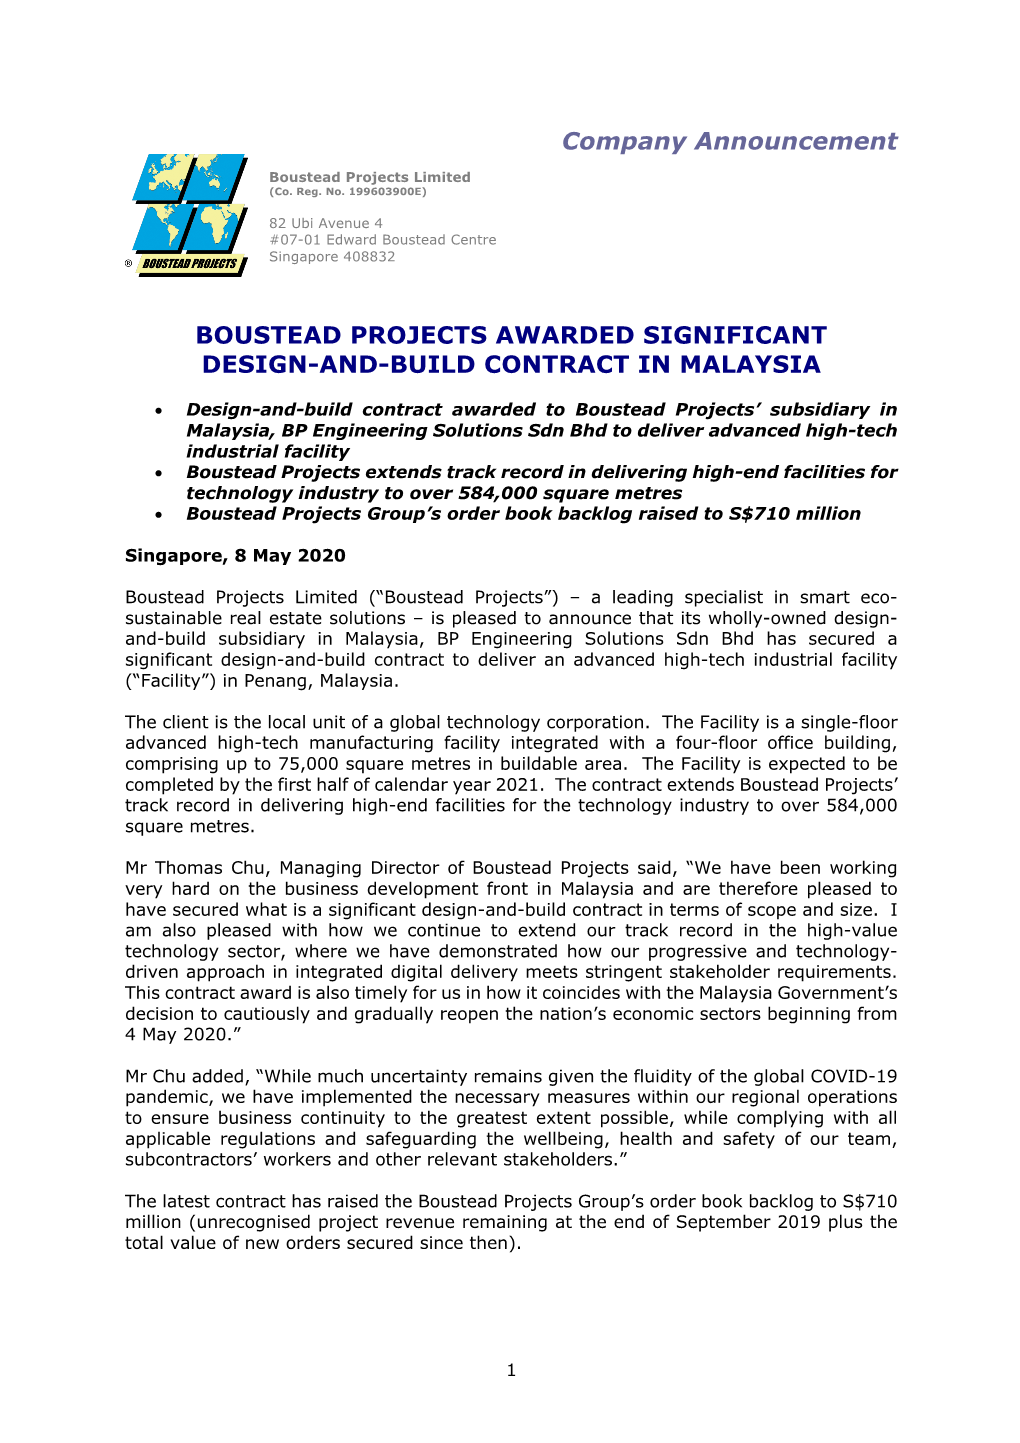 Company Announcement BOUSTEAD PROJECTS AWARDED